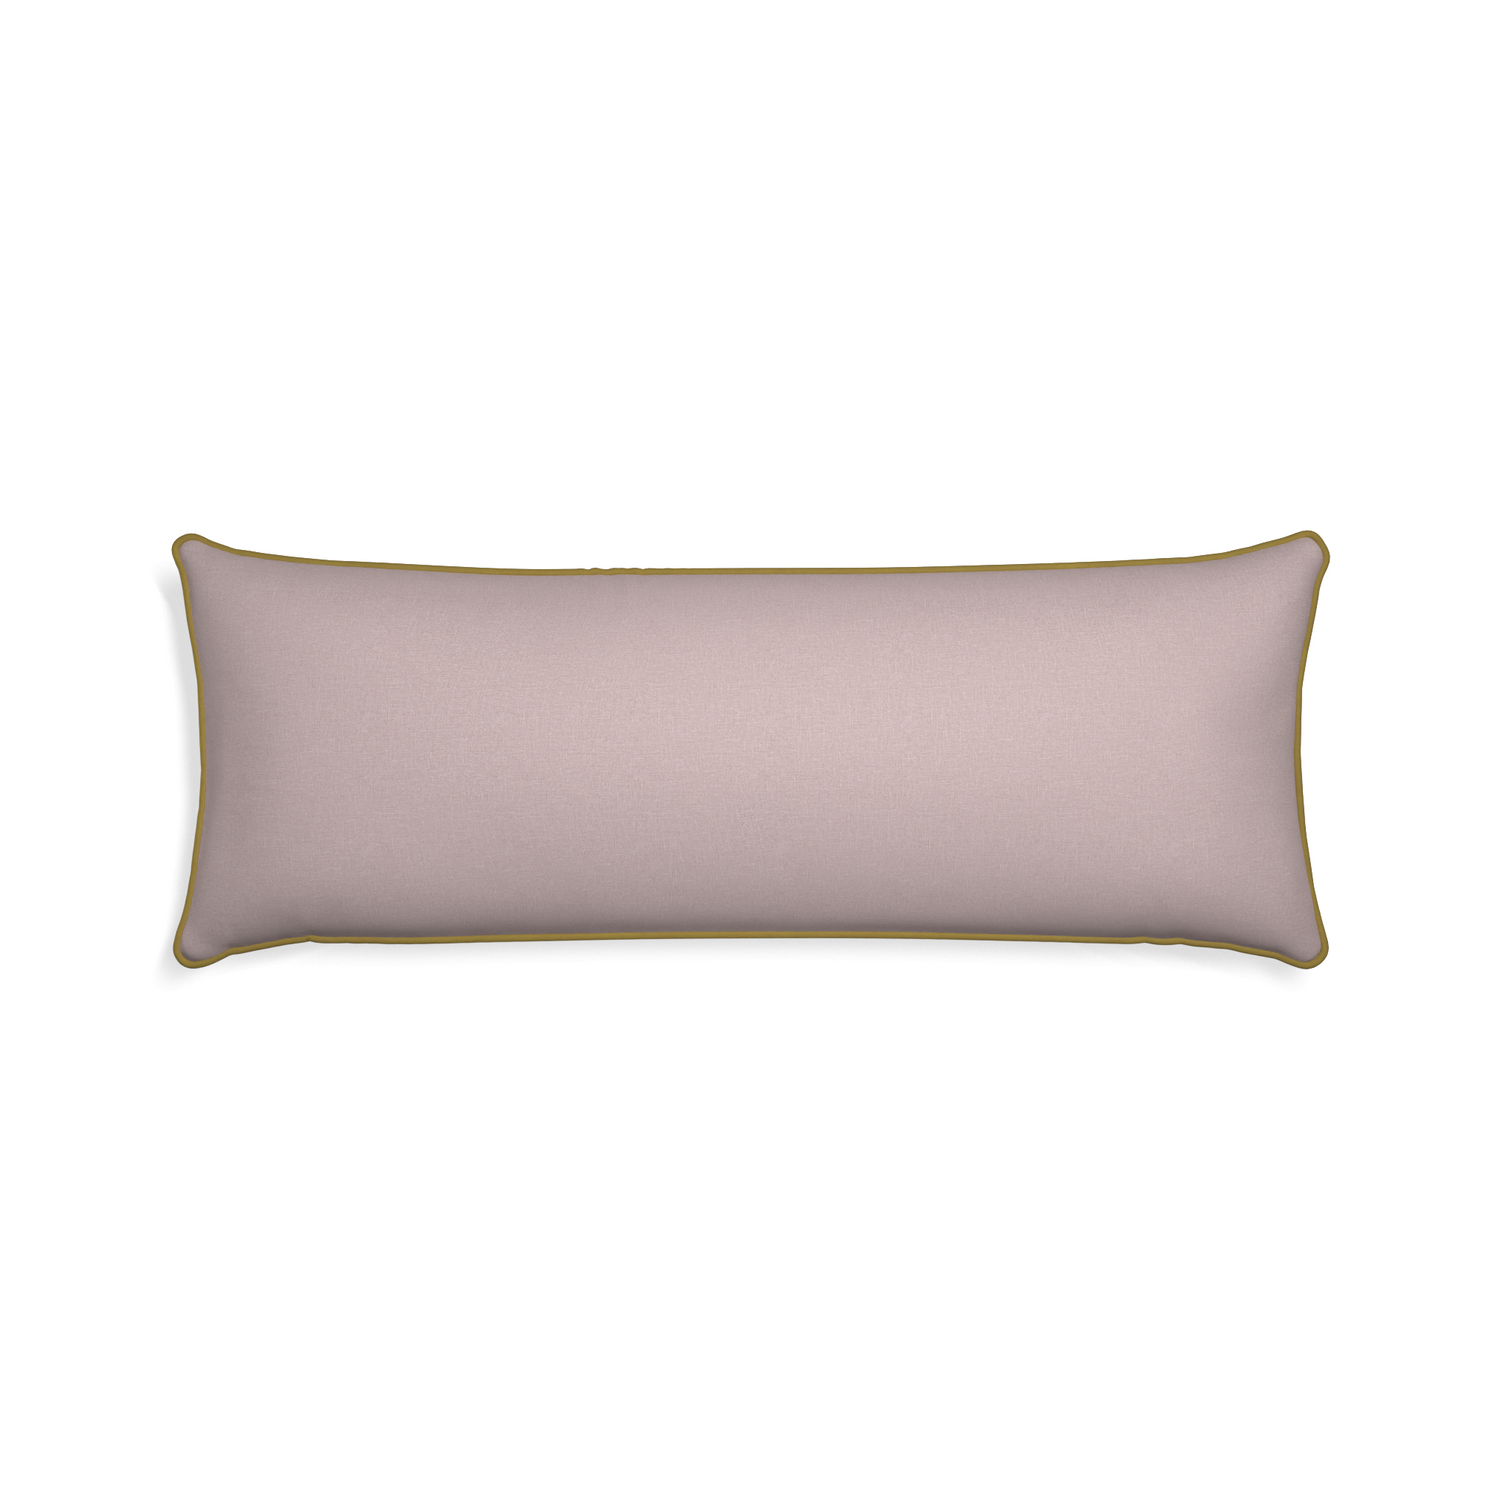 Xl-lumbar orchid custom mauve pinkpillow with c piping on white background